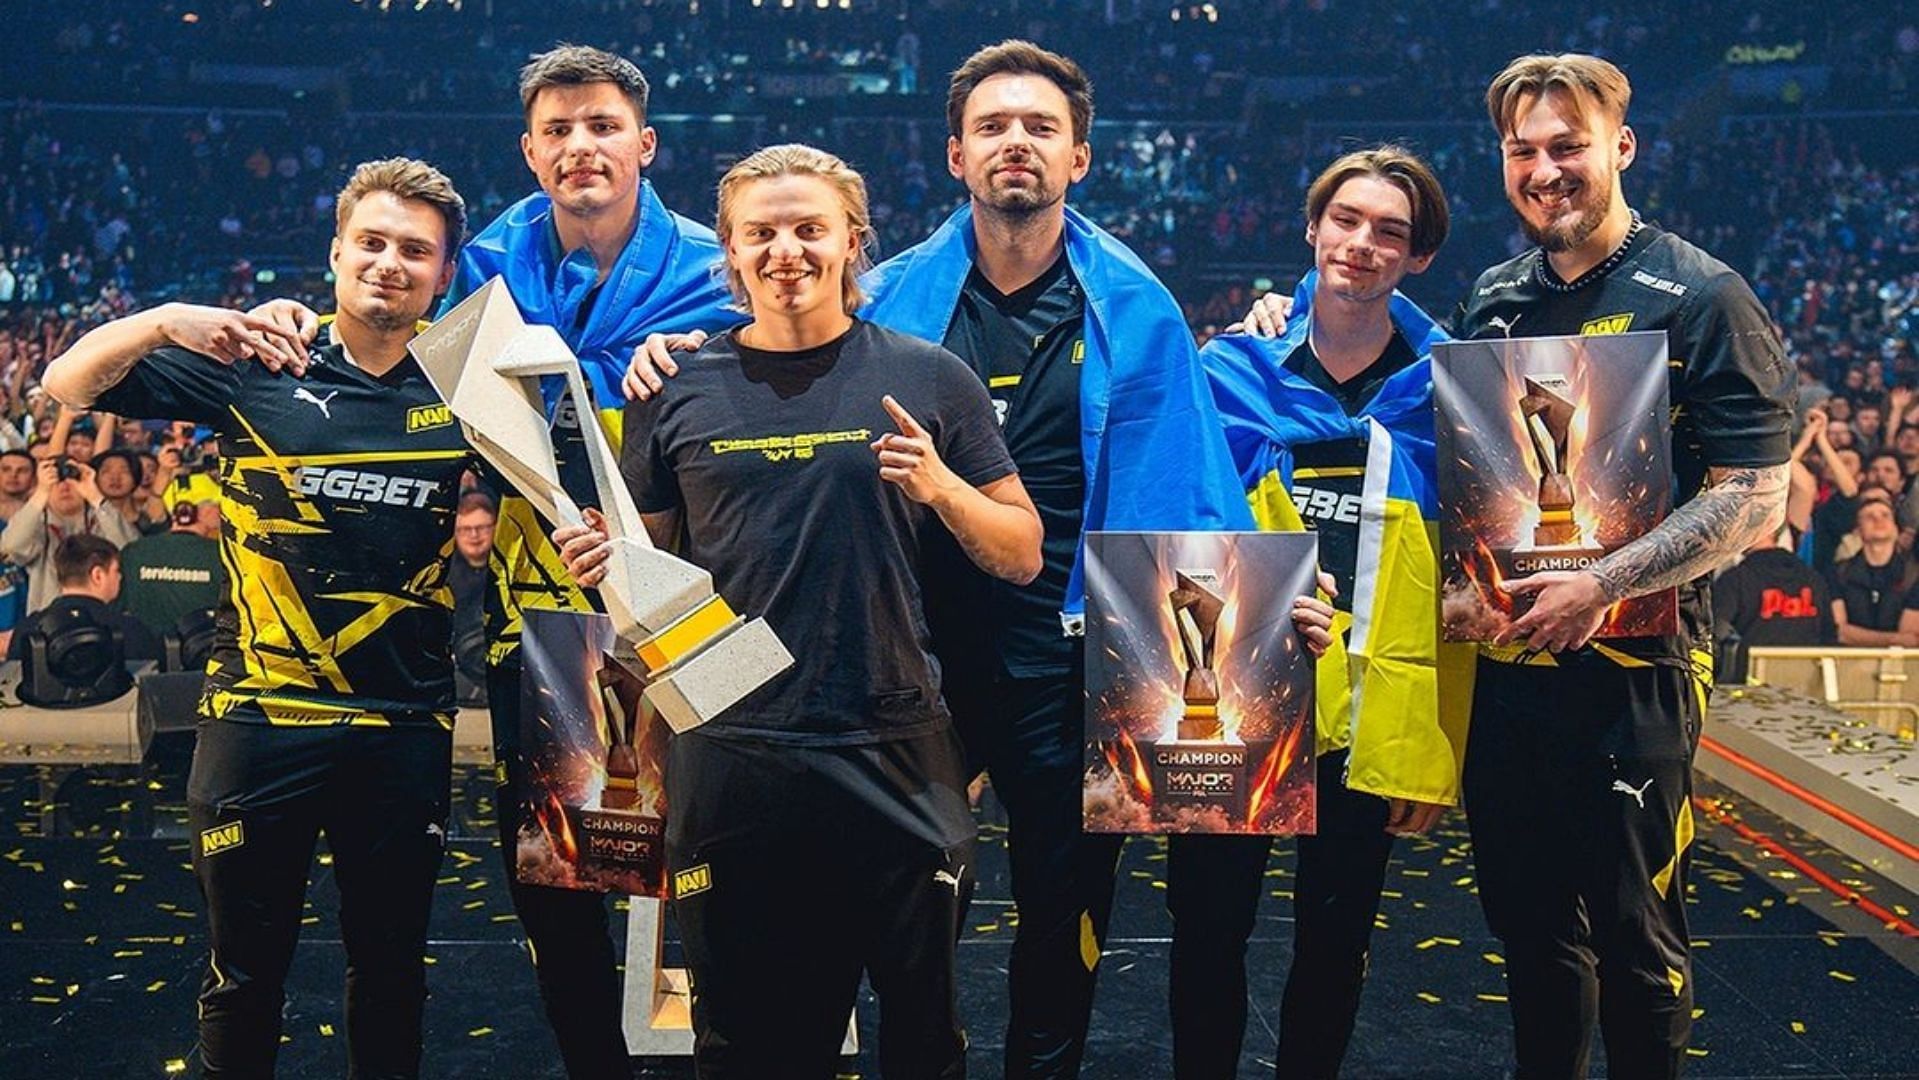 First CS2 Major Champions NaVi awaiting in-game trophy 40 days after event